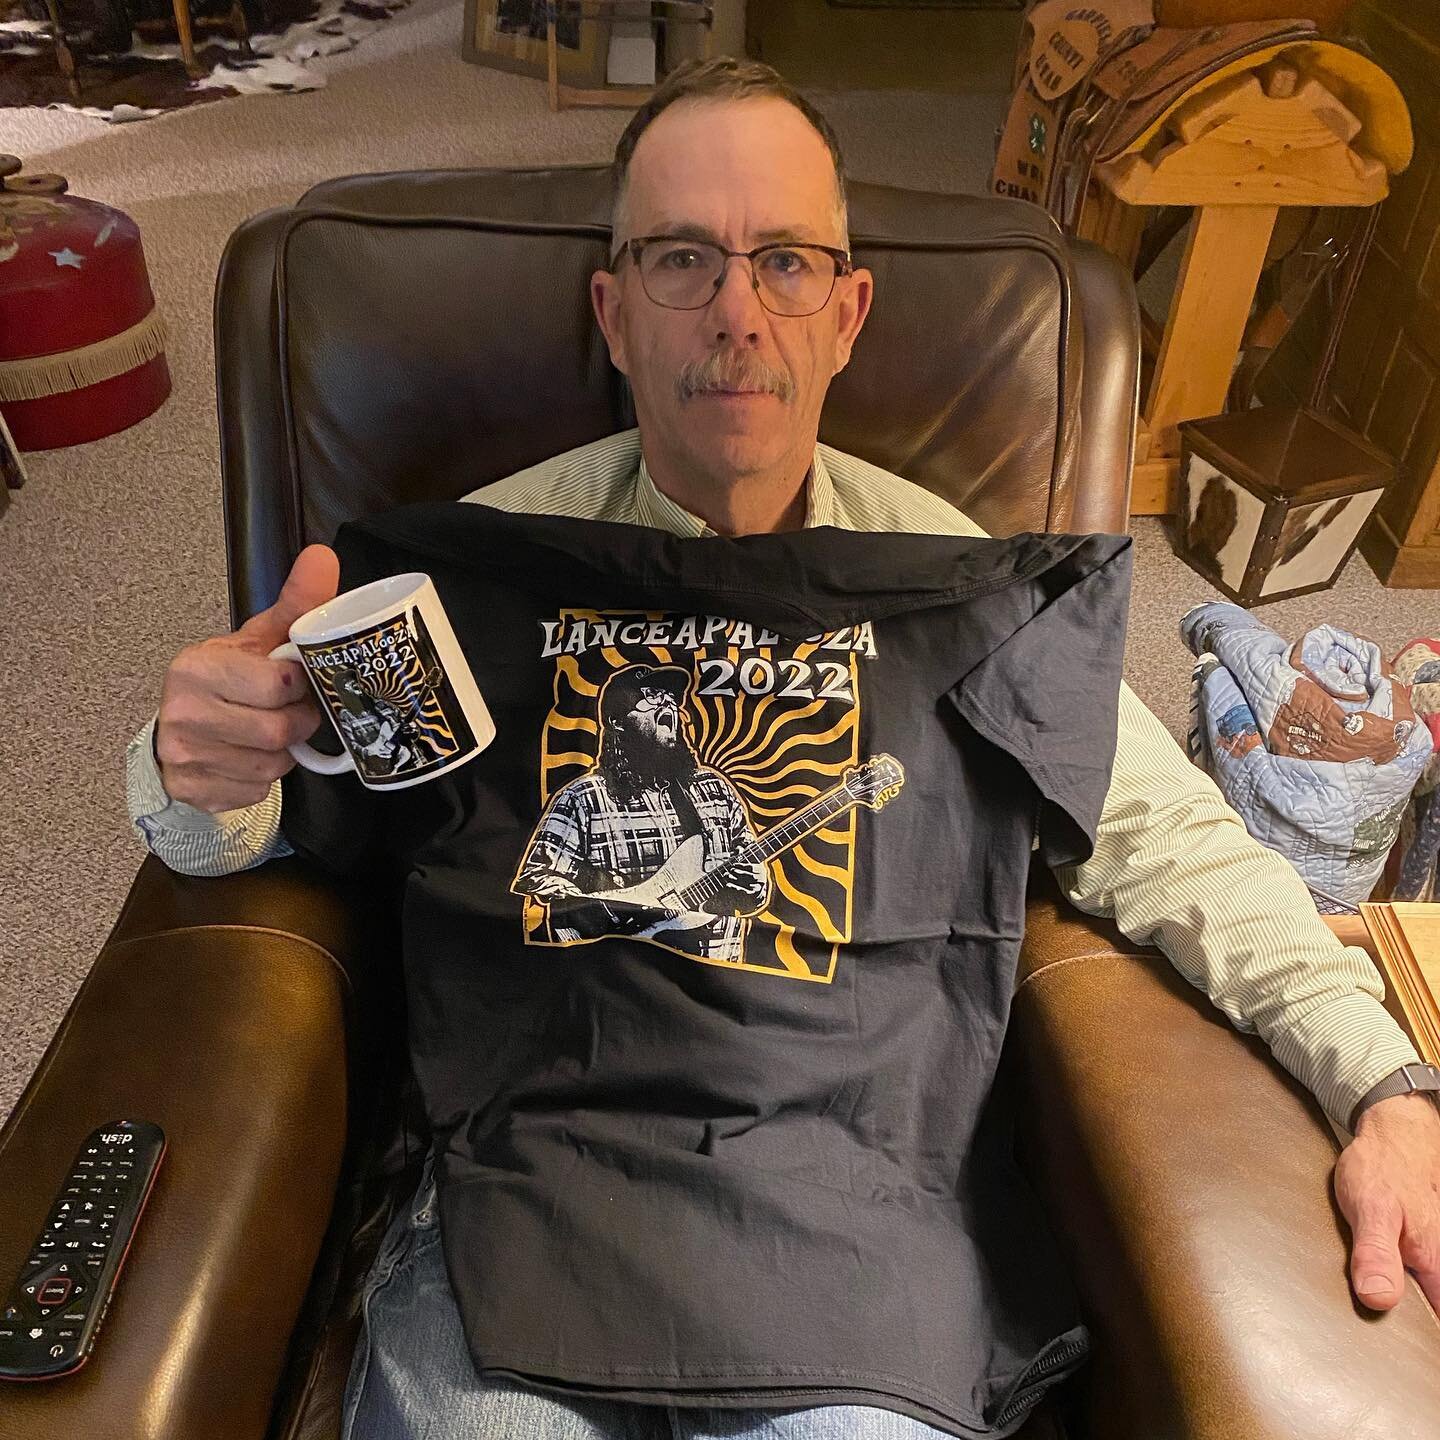 Do you want to be as stylish as my dad, Rusty Ruby, order your LANCEAPALOOZA merch today at: https://www.bevinluna.com/merch-1